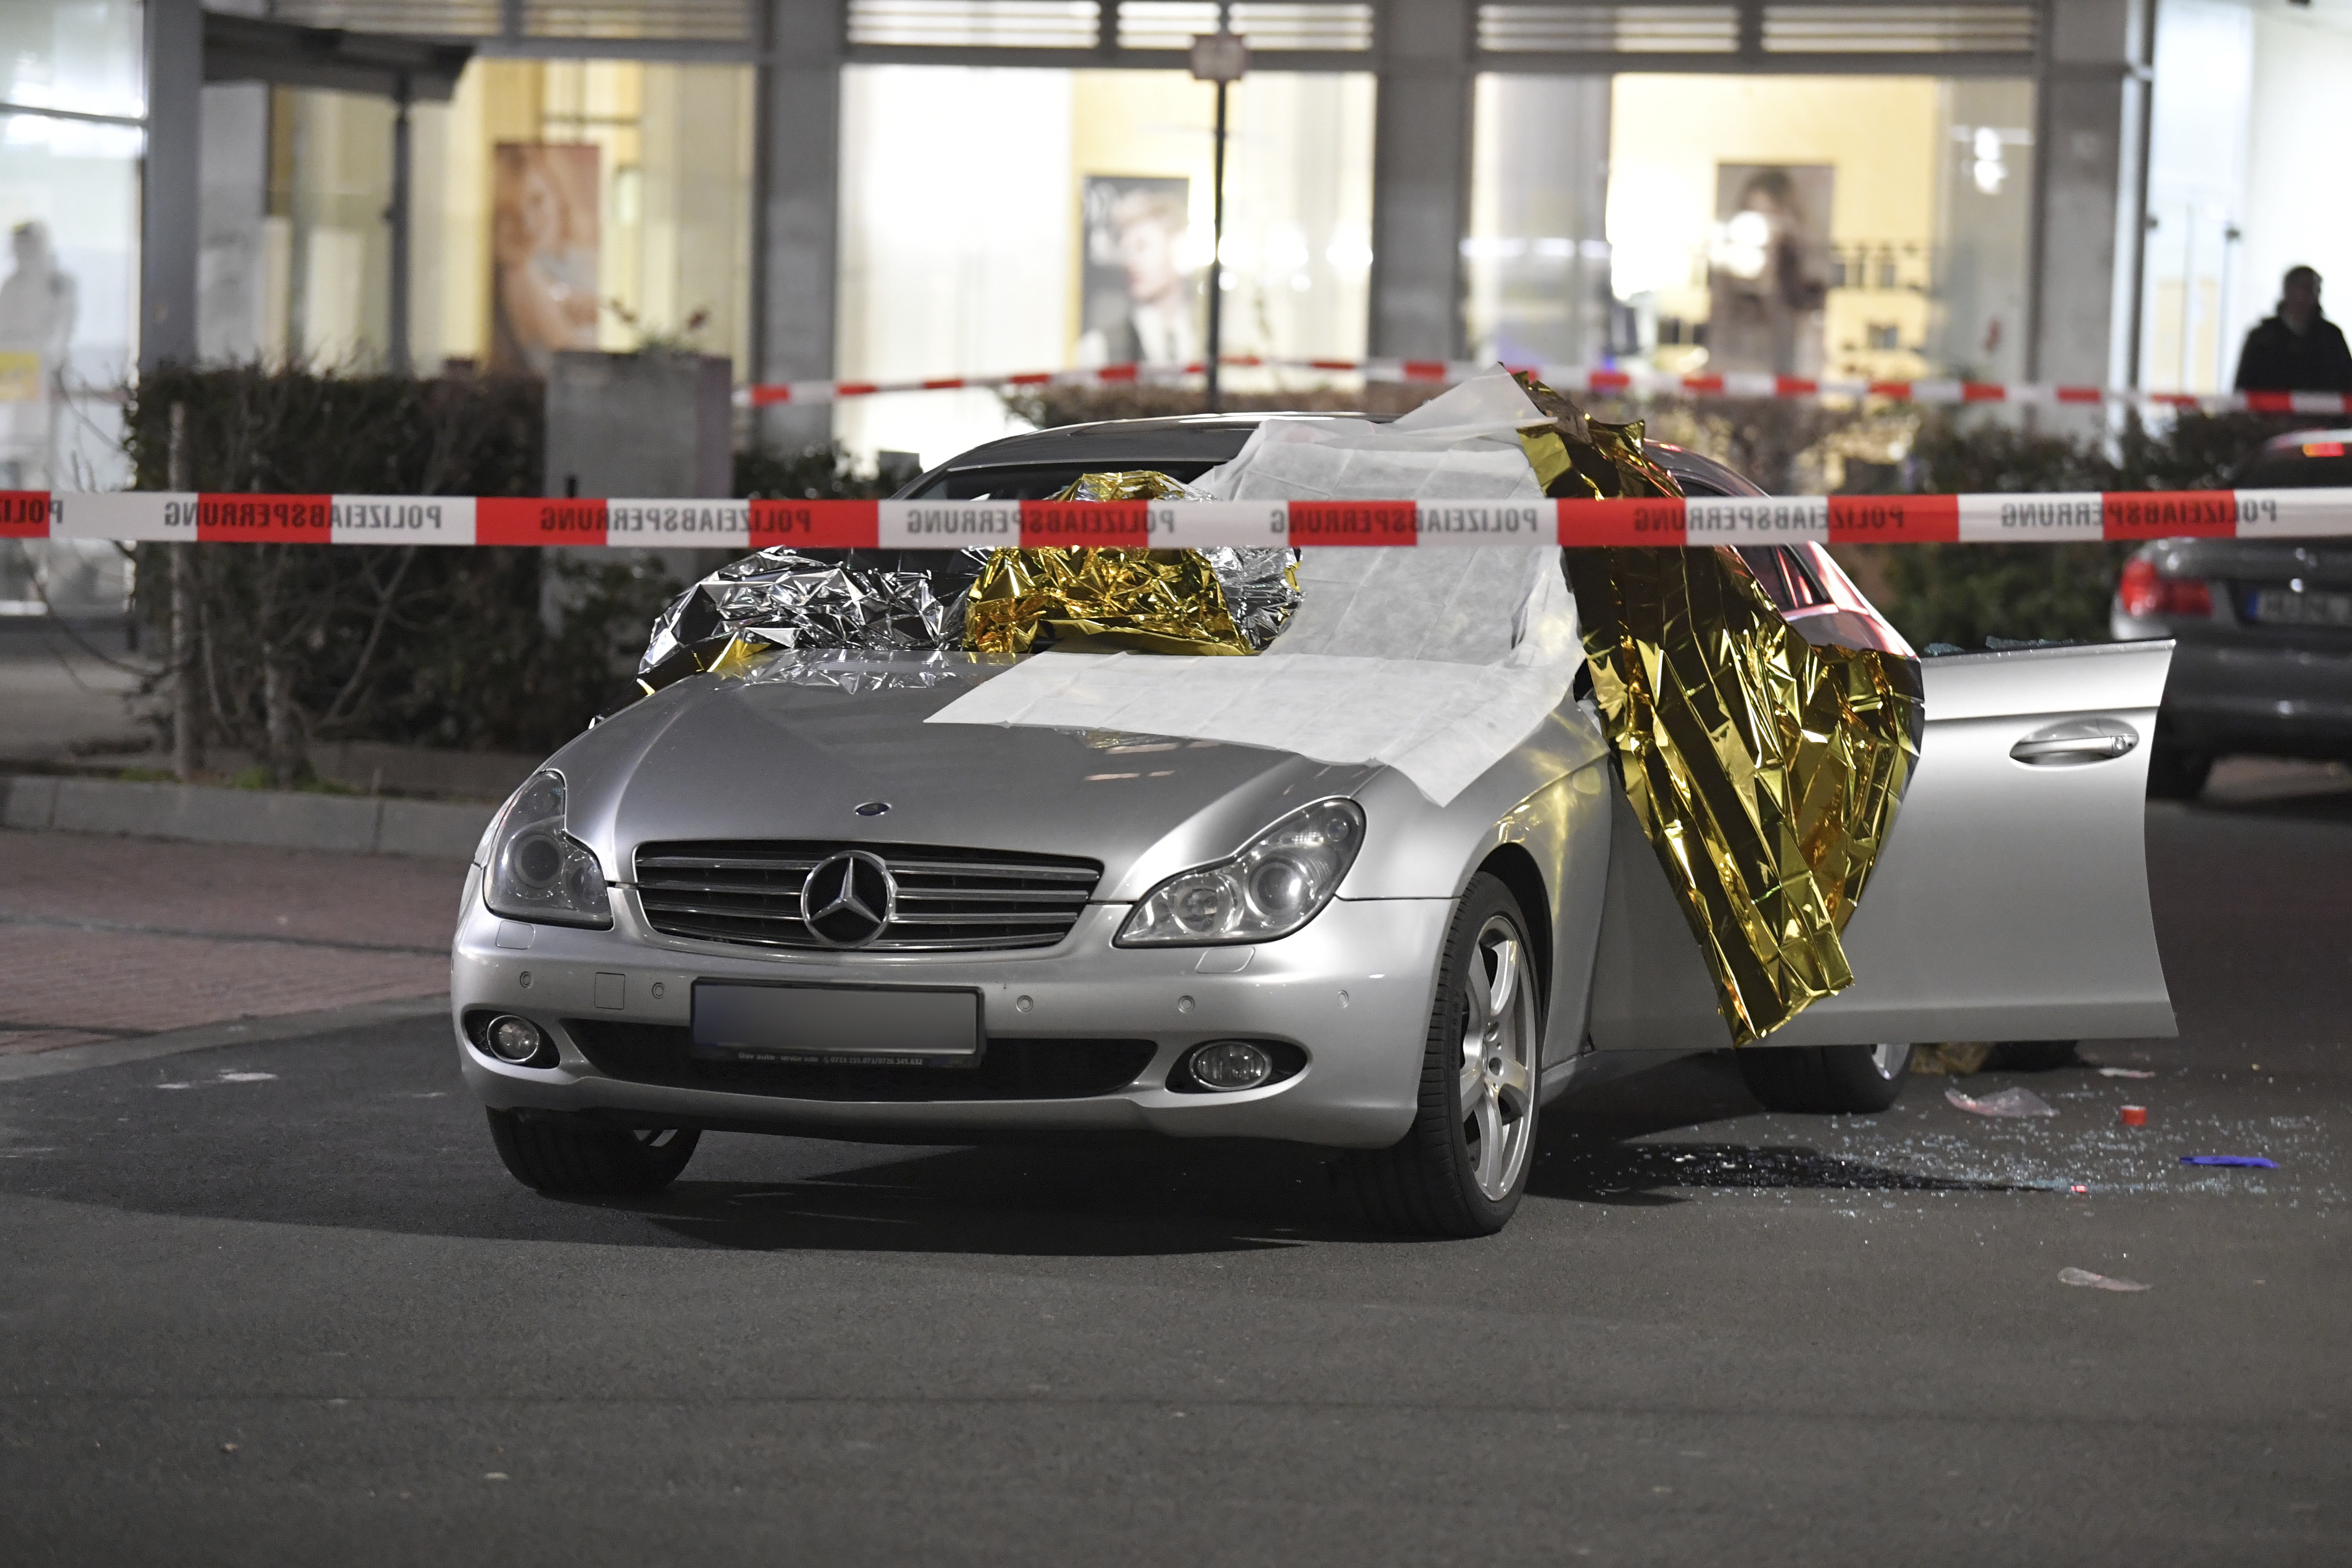  One of the shootings took place at the Arena Bar in Hanau, with a silver car seen at the scene